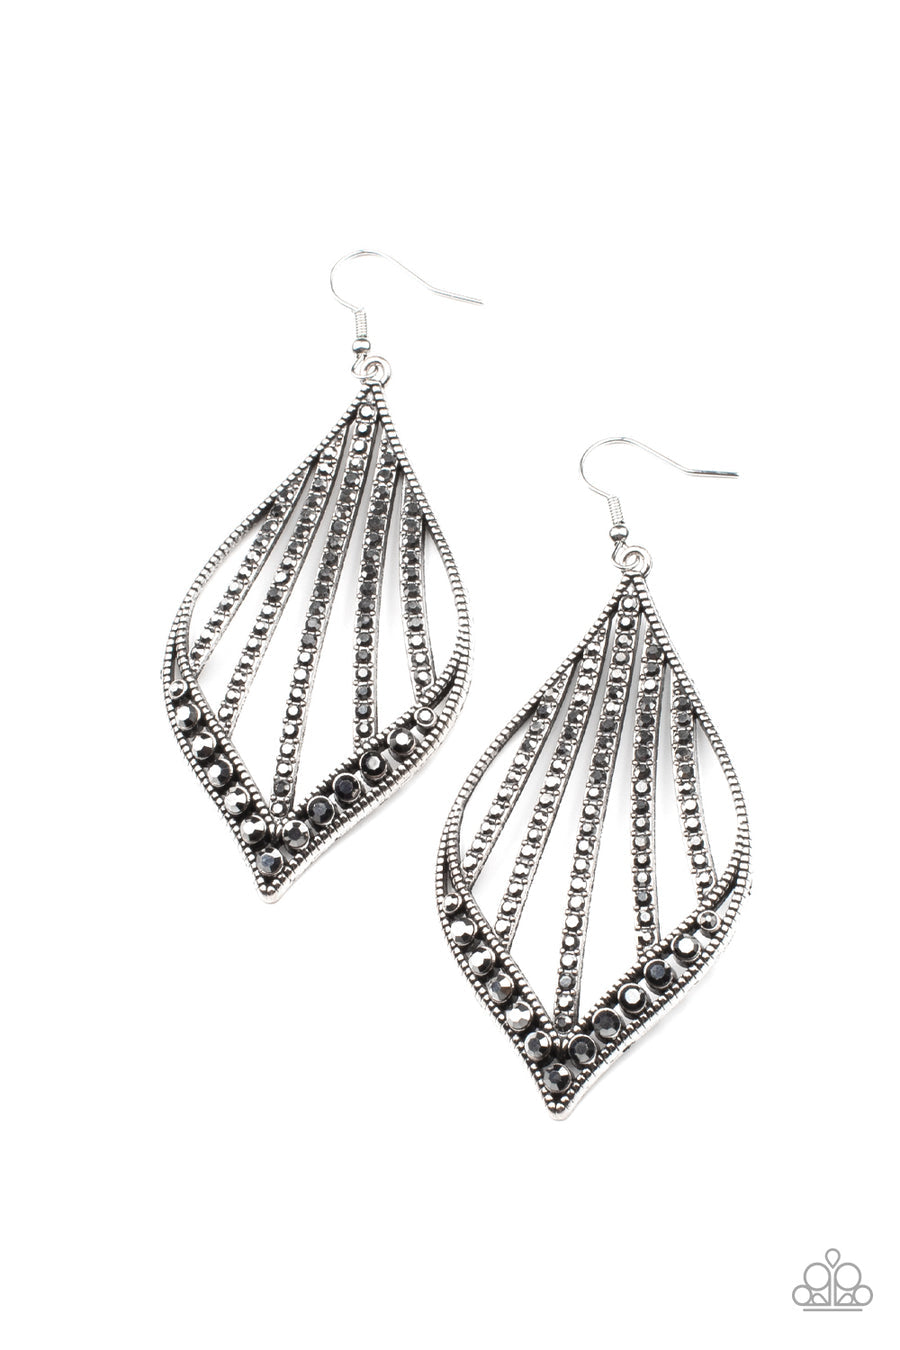 Showcase Sparkle - Silver Earrings - Paparazzi Accessories - Curved rows of smoky hematite rhinestones streak across the center of a studded marquise shaped silver frame. The bottom of the frame is encrusted in matching hematite rhinestones, creating a dramatic centerpiece.